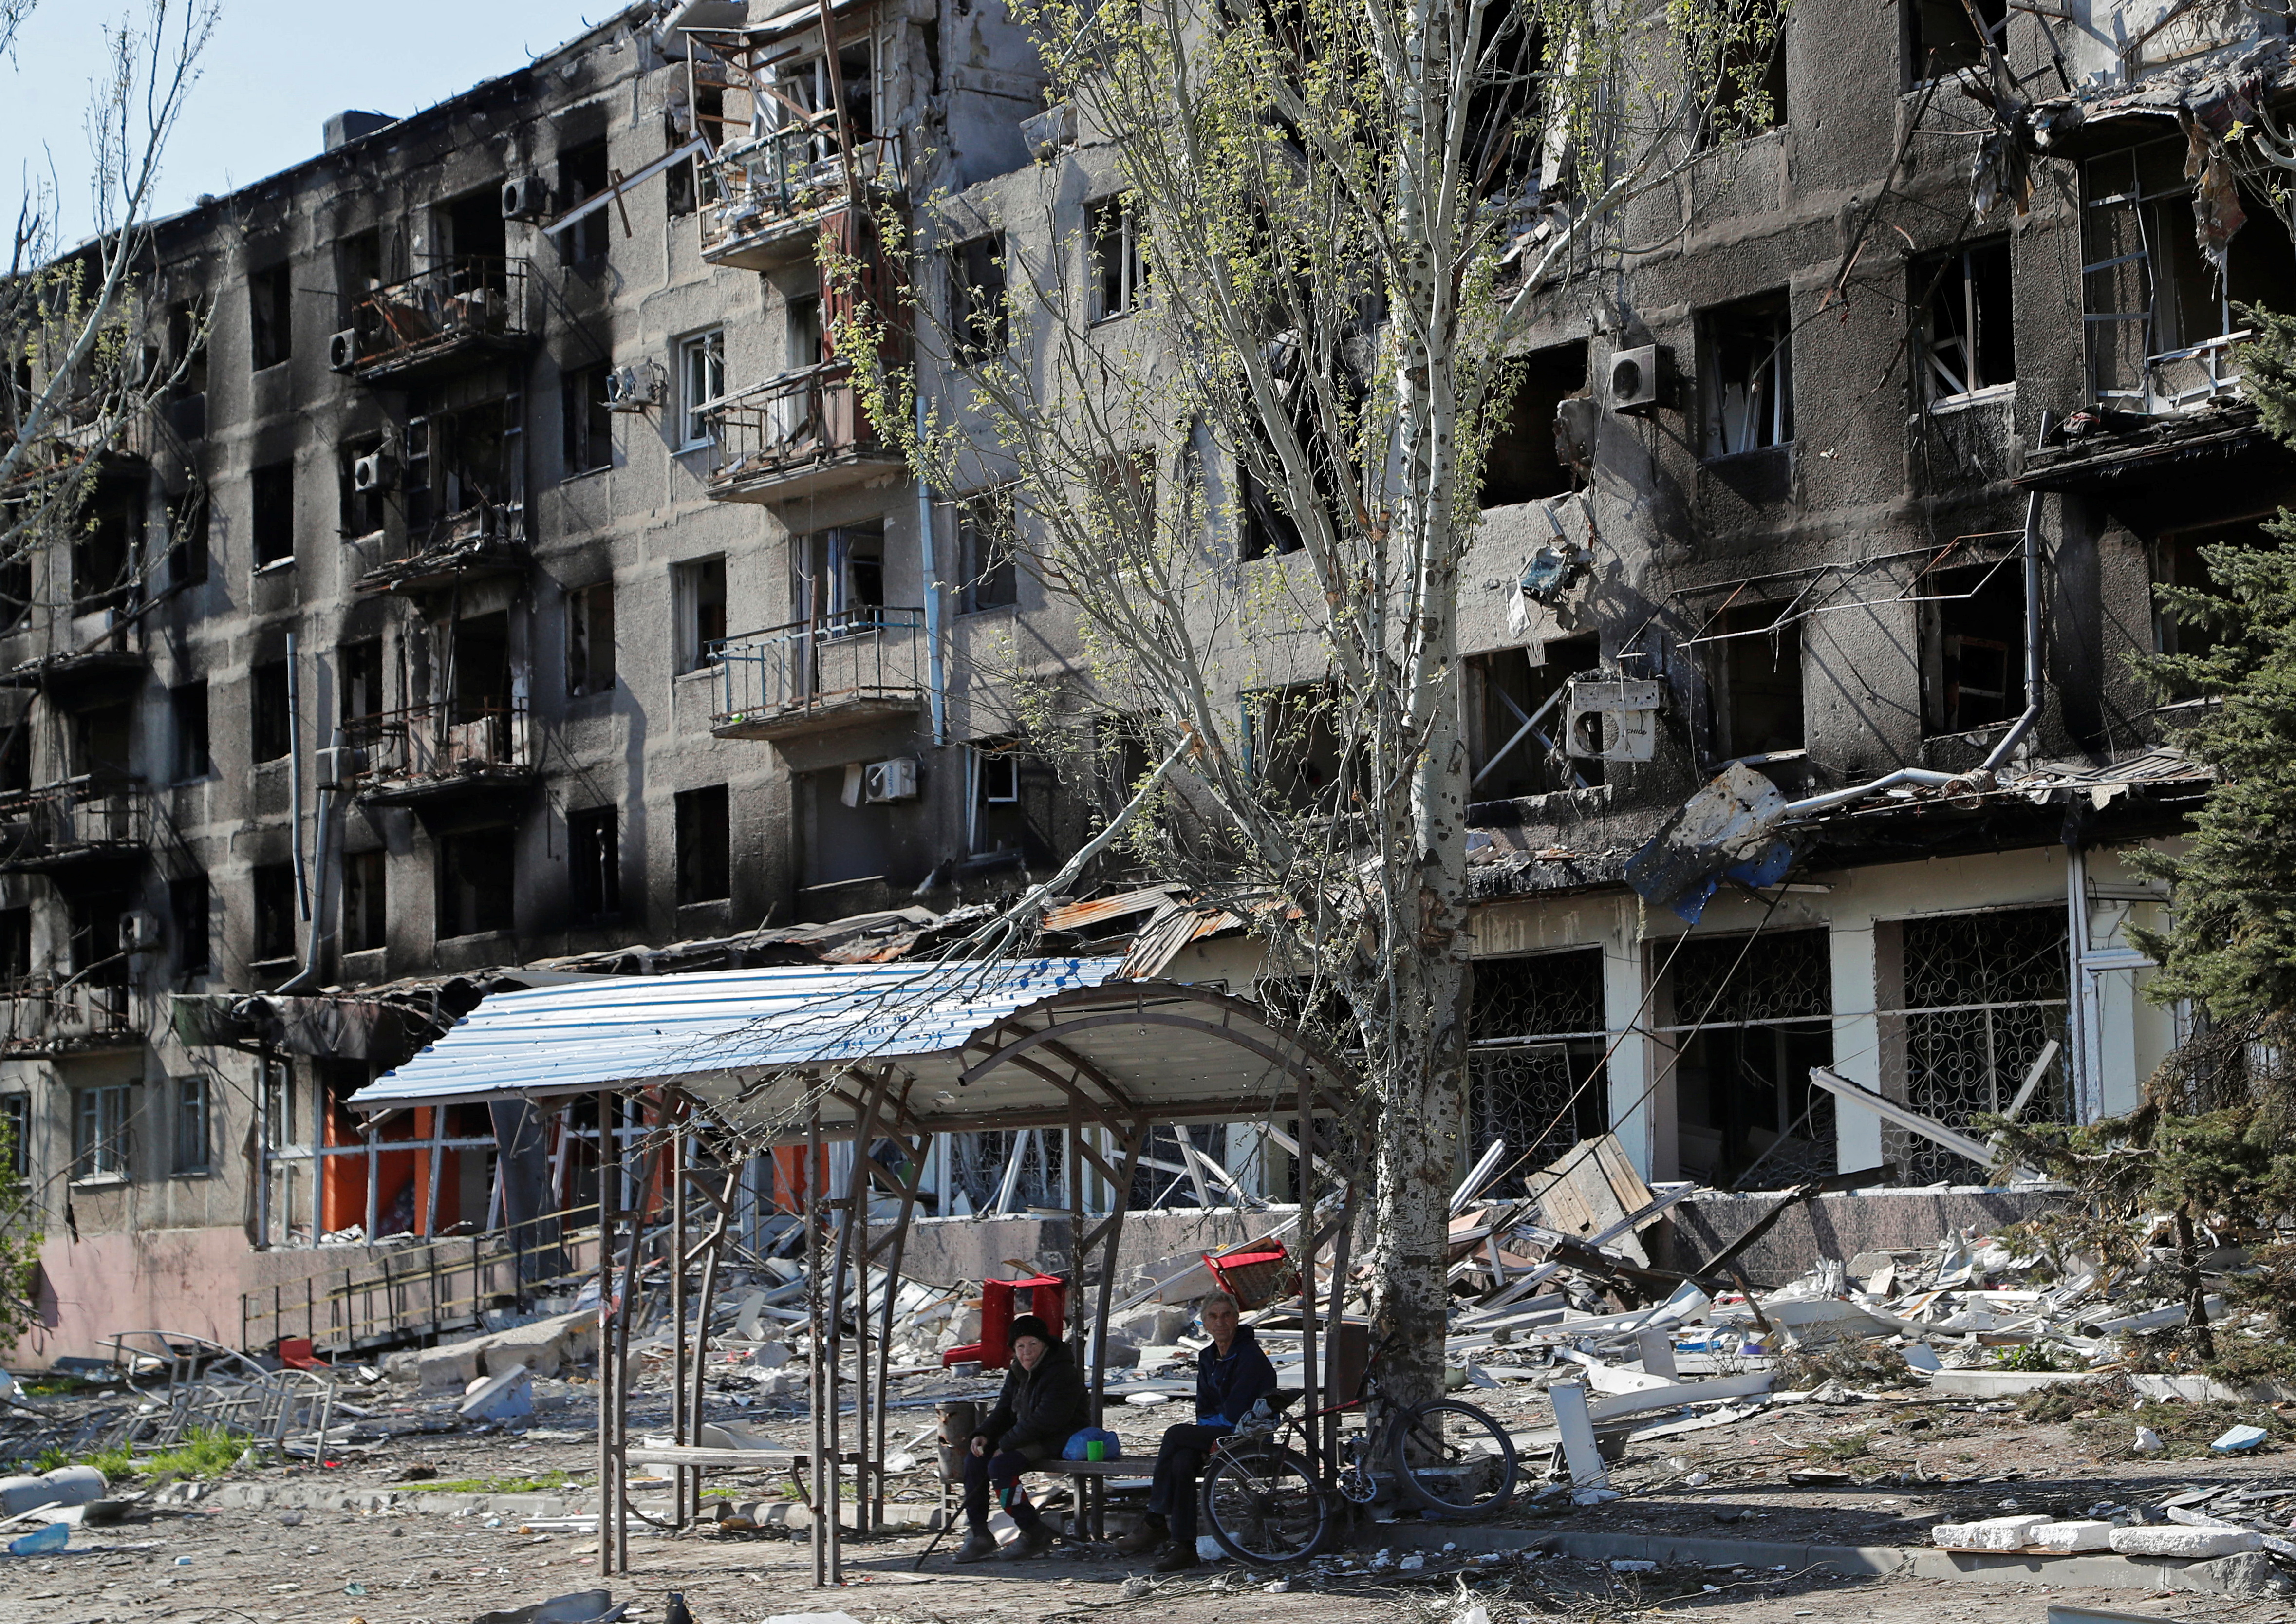 Local residents sit on a bench near a damaged apartment building in Mariupol